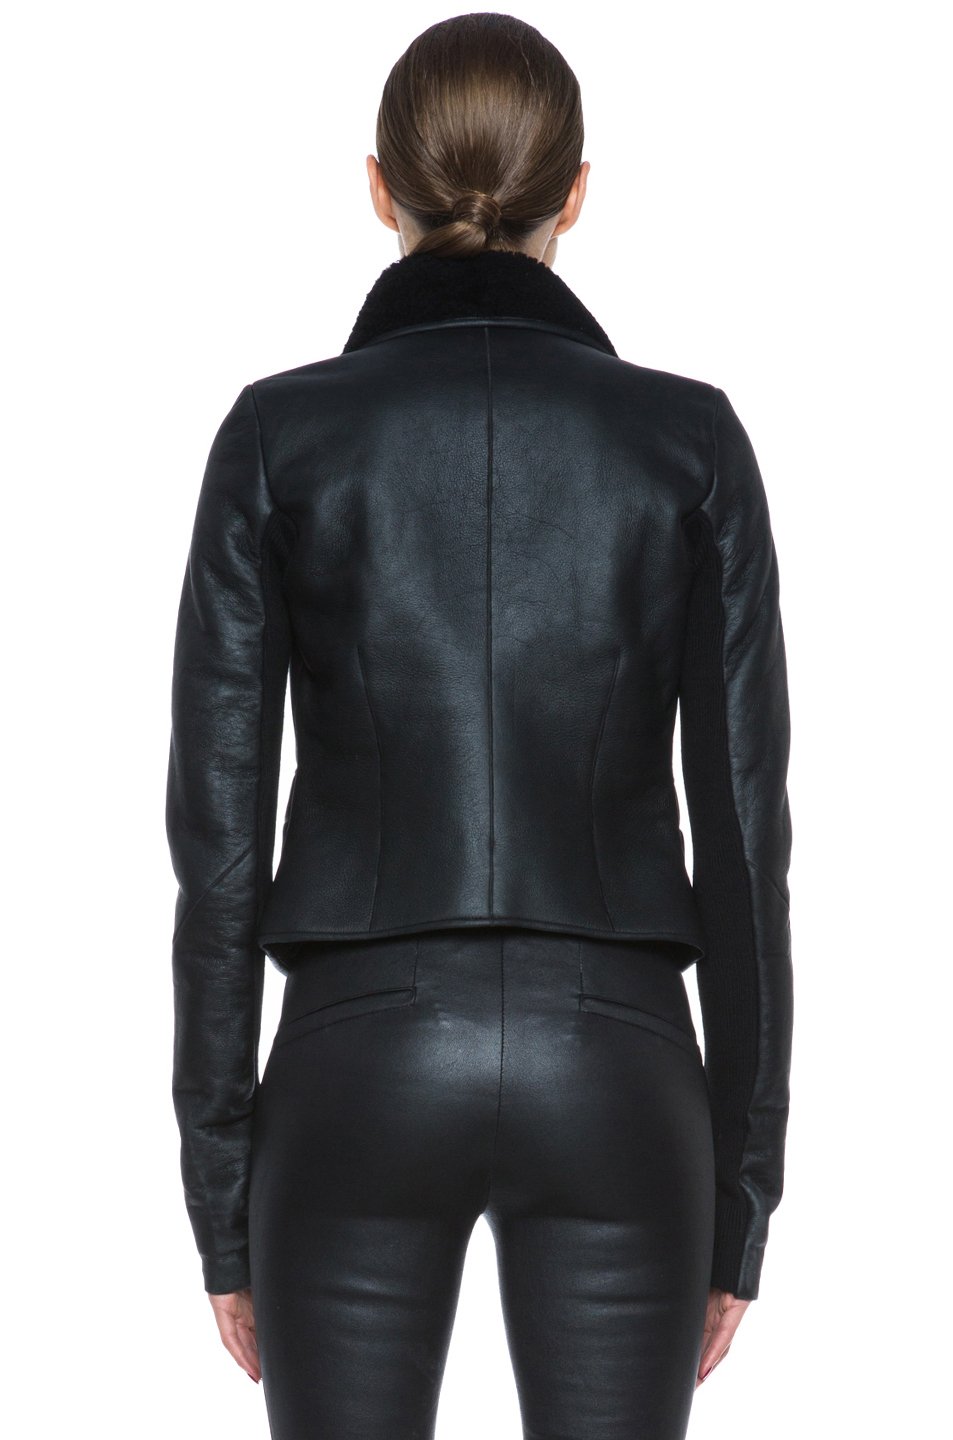 Rick Owens Biker Leather and Shearling Jacket in Black - Lyst